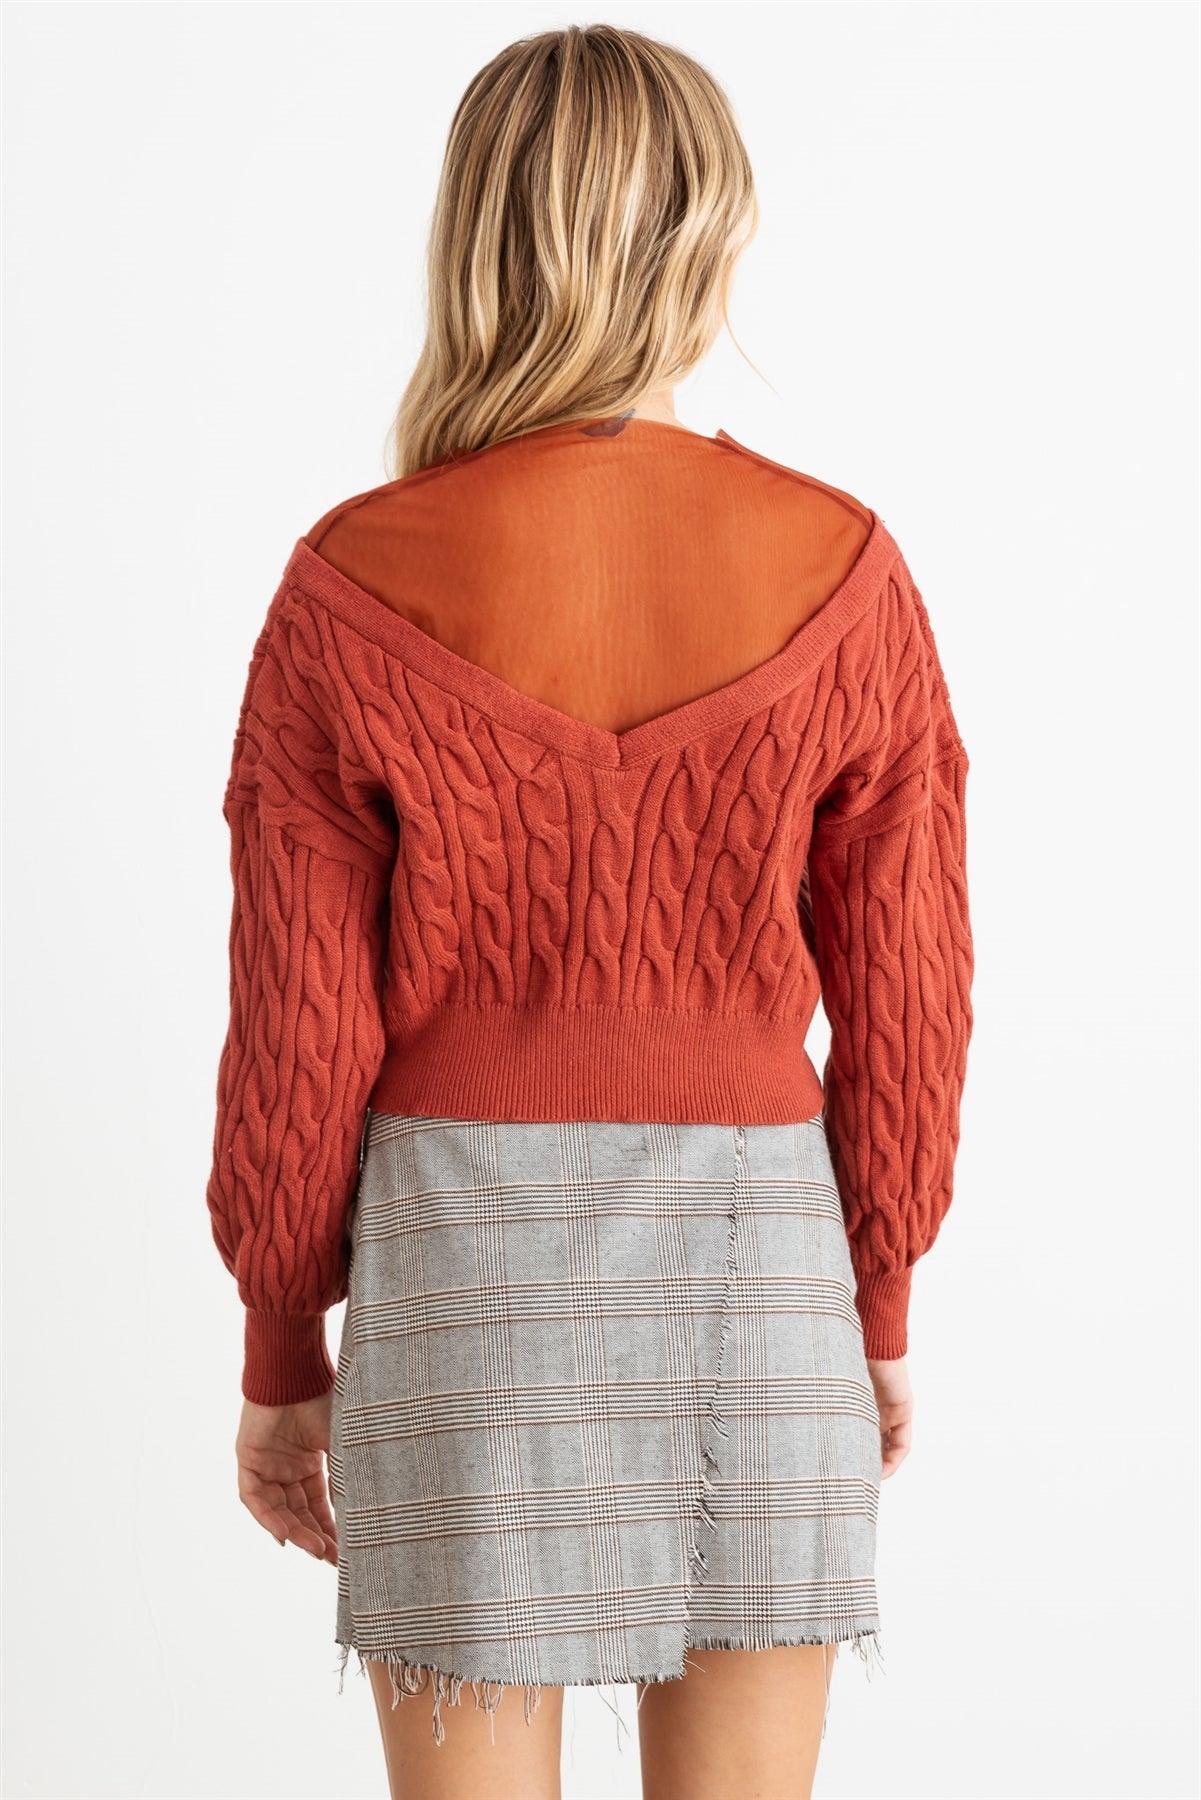 Rust Cable Knit & Mesh Rhinestone Button-Up Sweater/Cardigan back